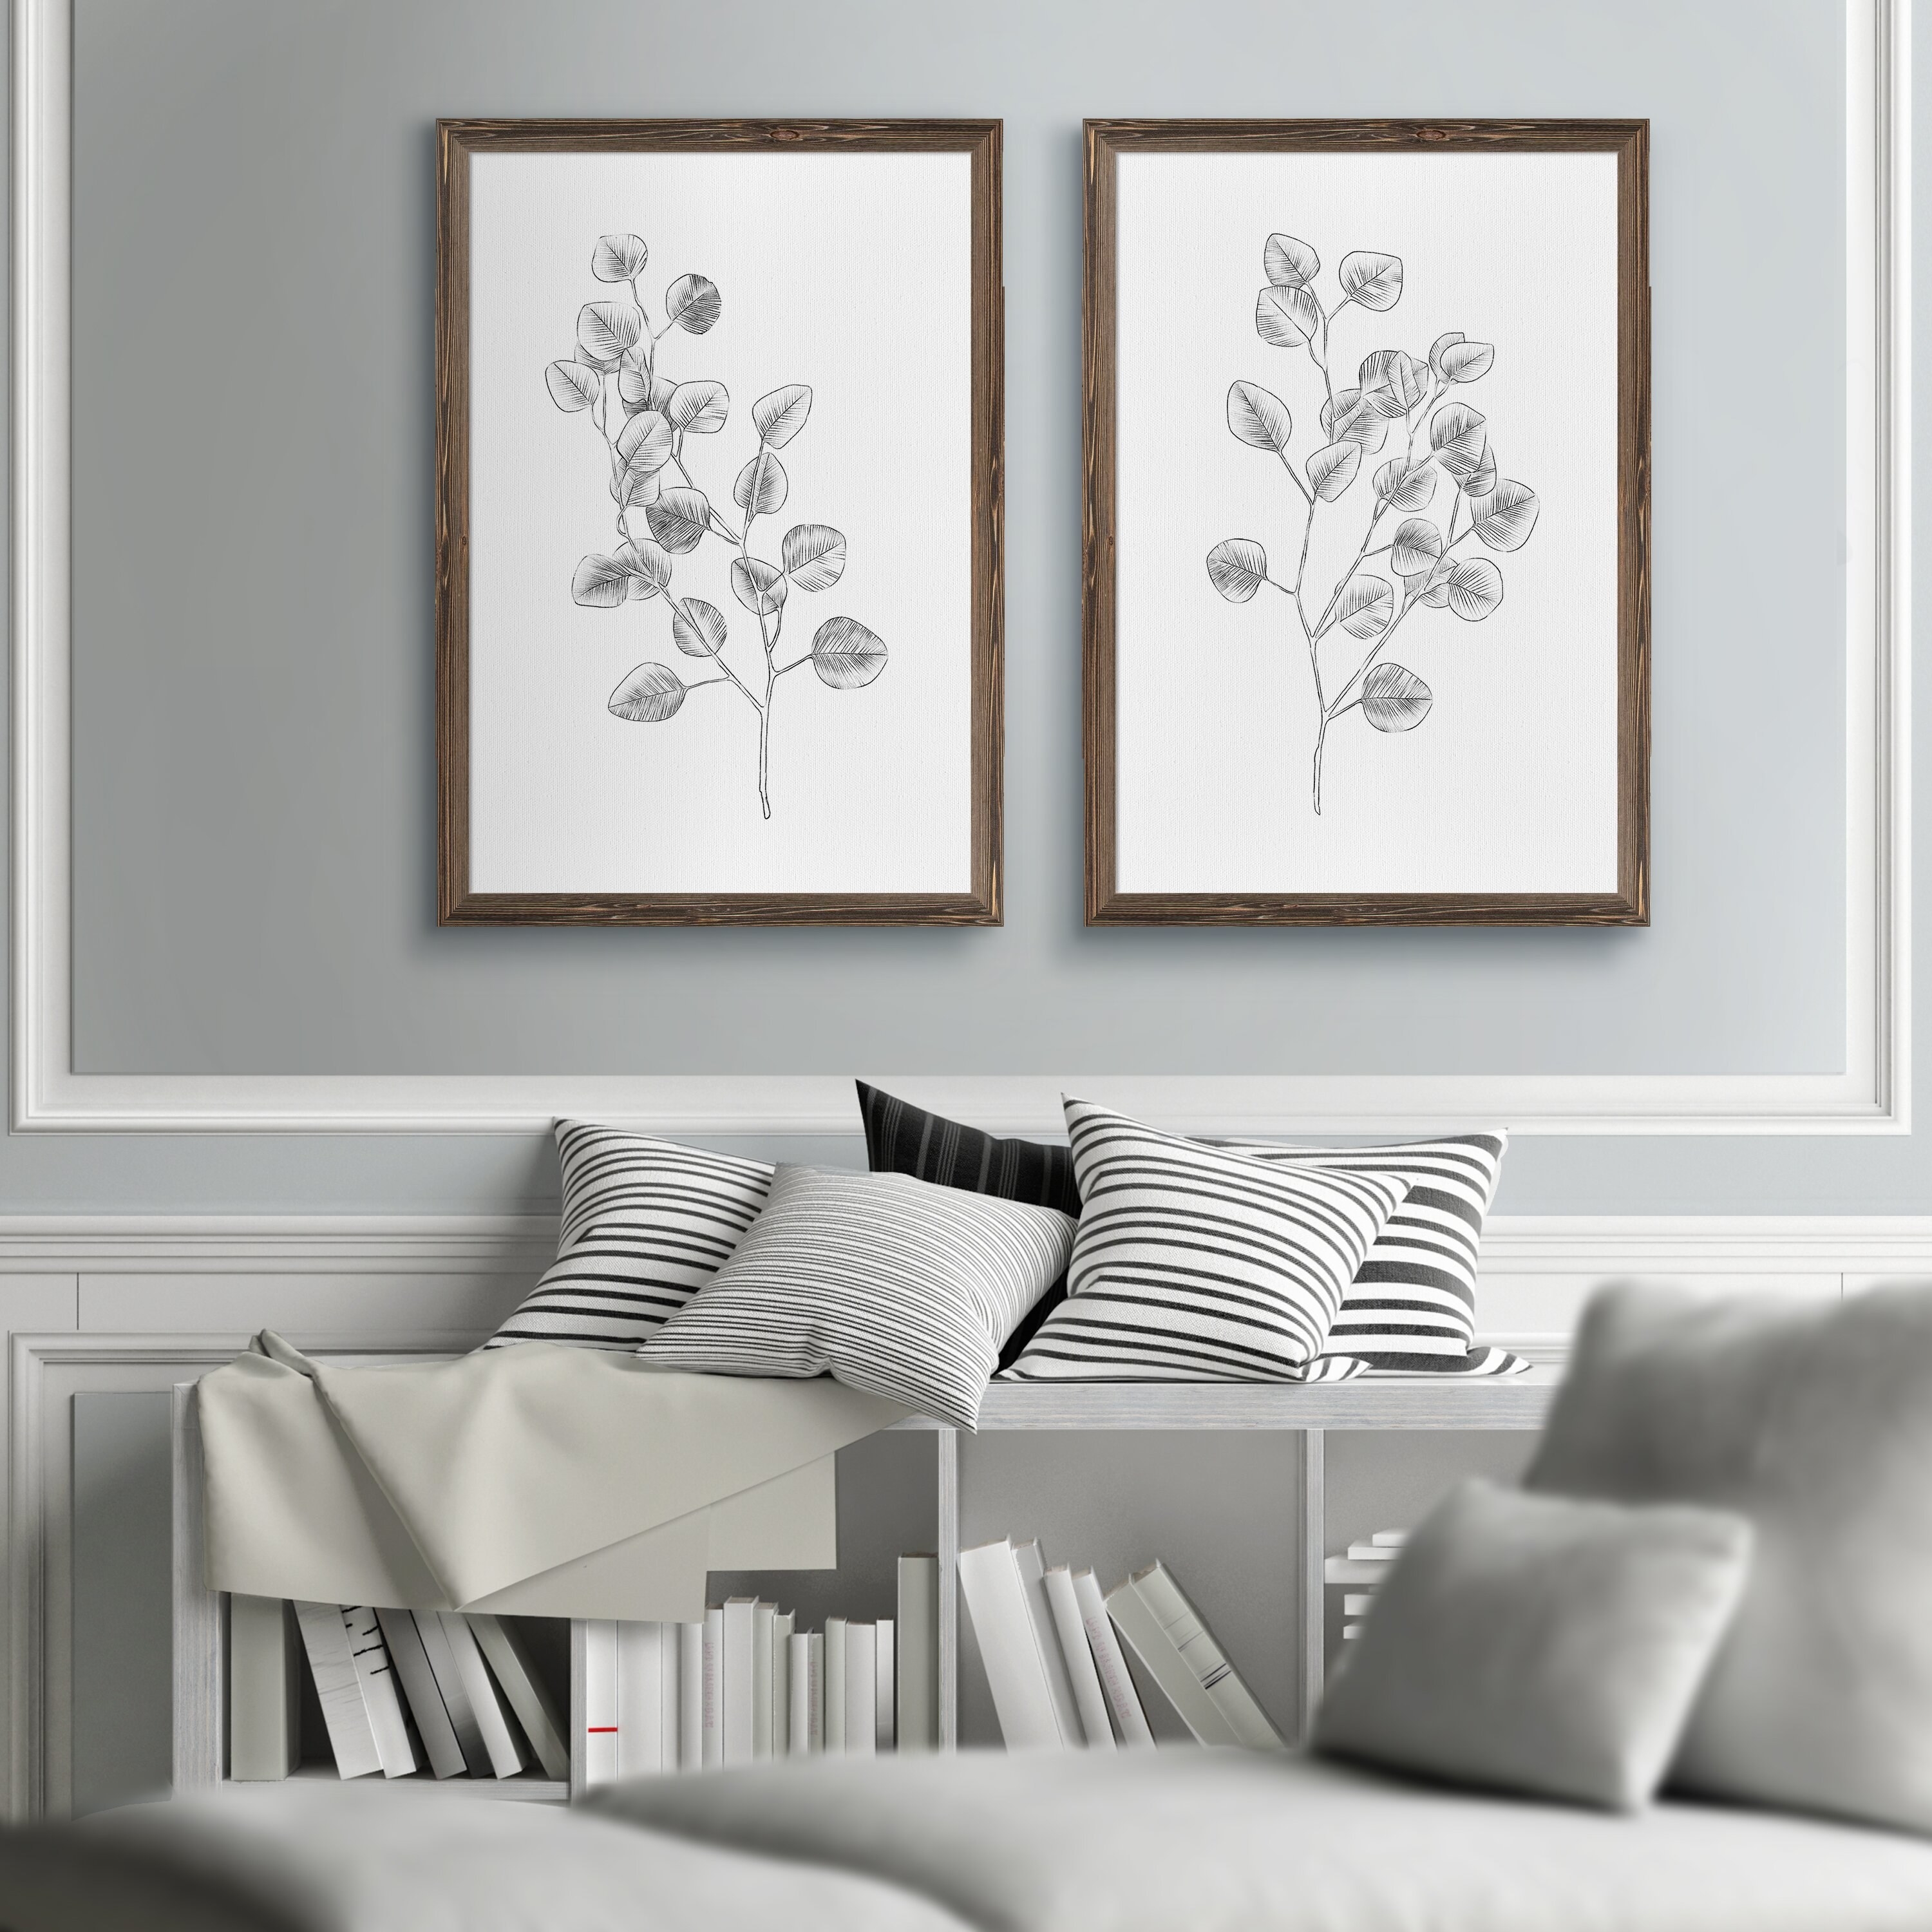 the two framed eucalyptus plant sketches hanging on a wall above a couch and pile of pillows